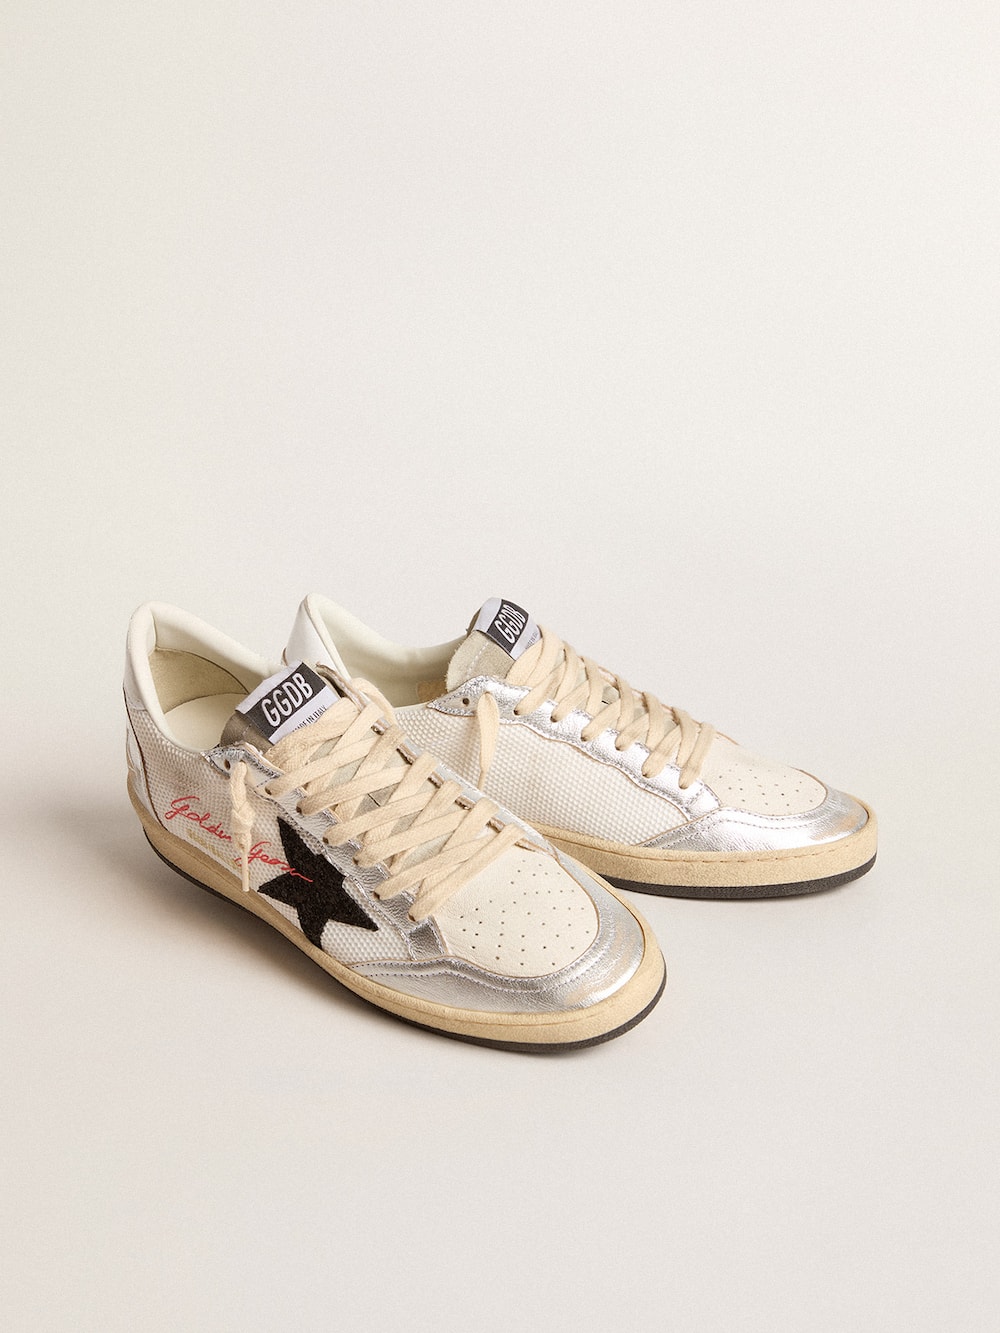 Golden Goose - Ball Star in white mesh with black glitter star and silver inserts in 